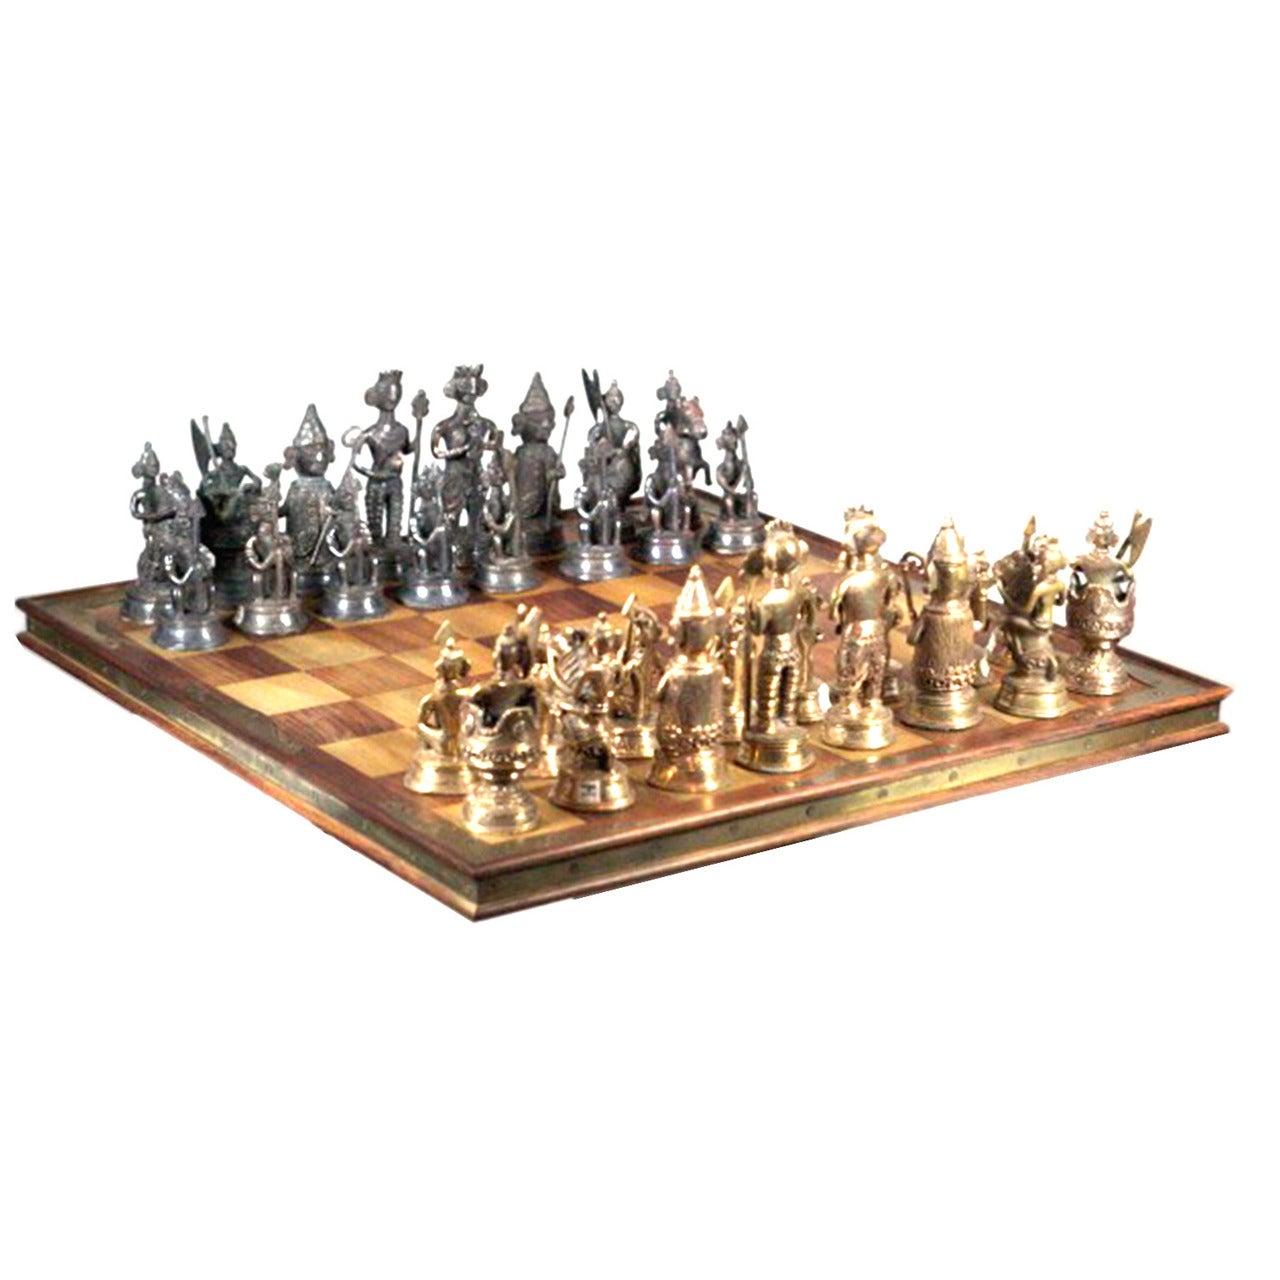 Midcentury Indian Chess Set with Solid Brass Chess Pieces